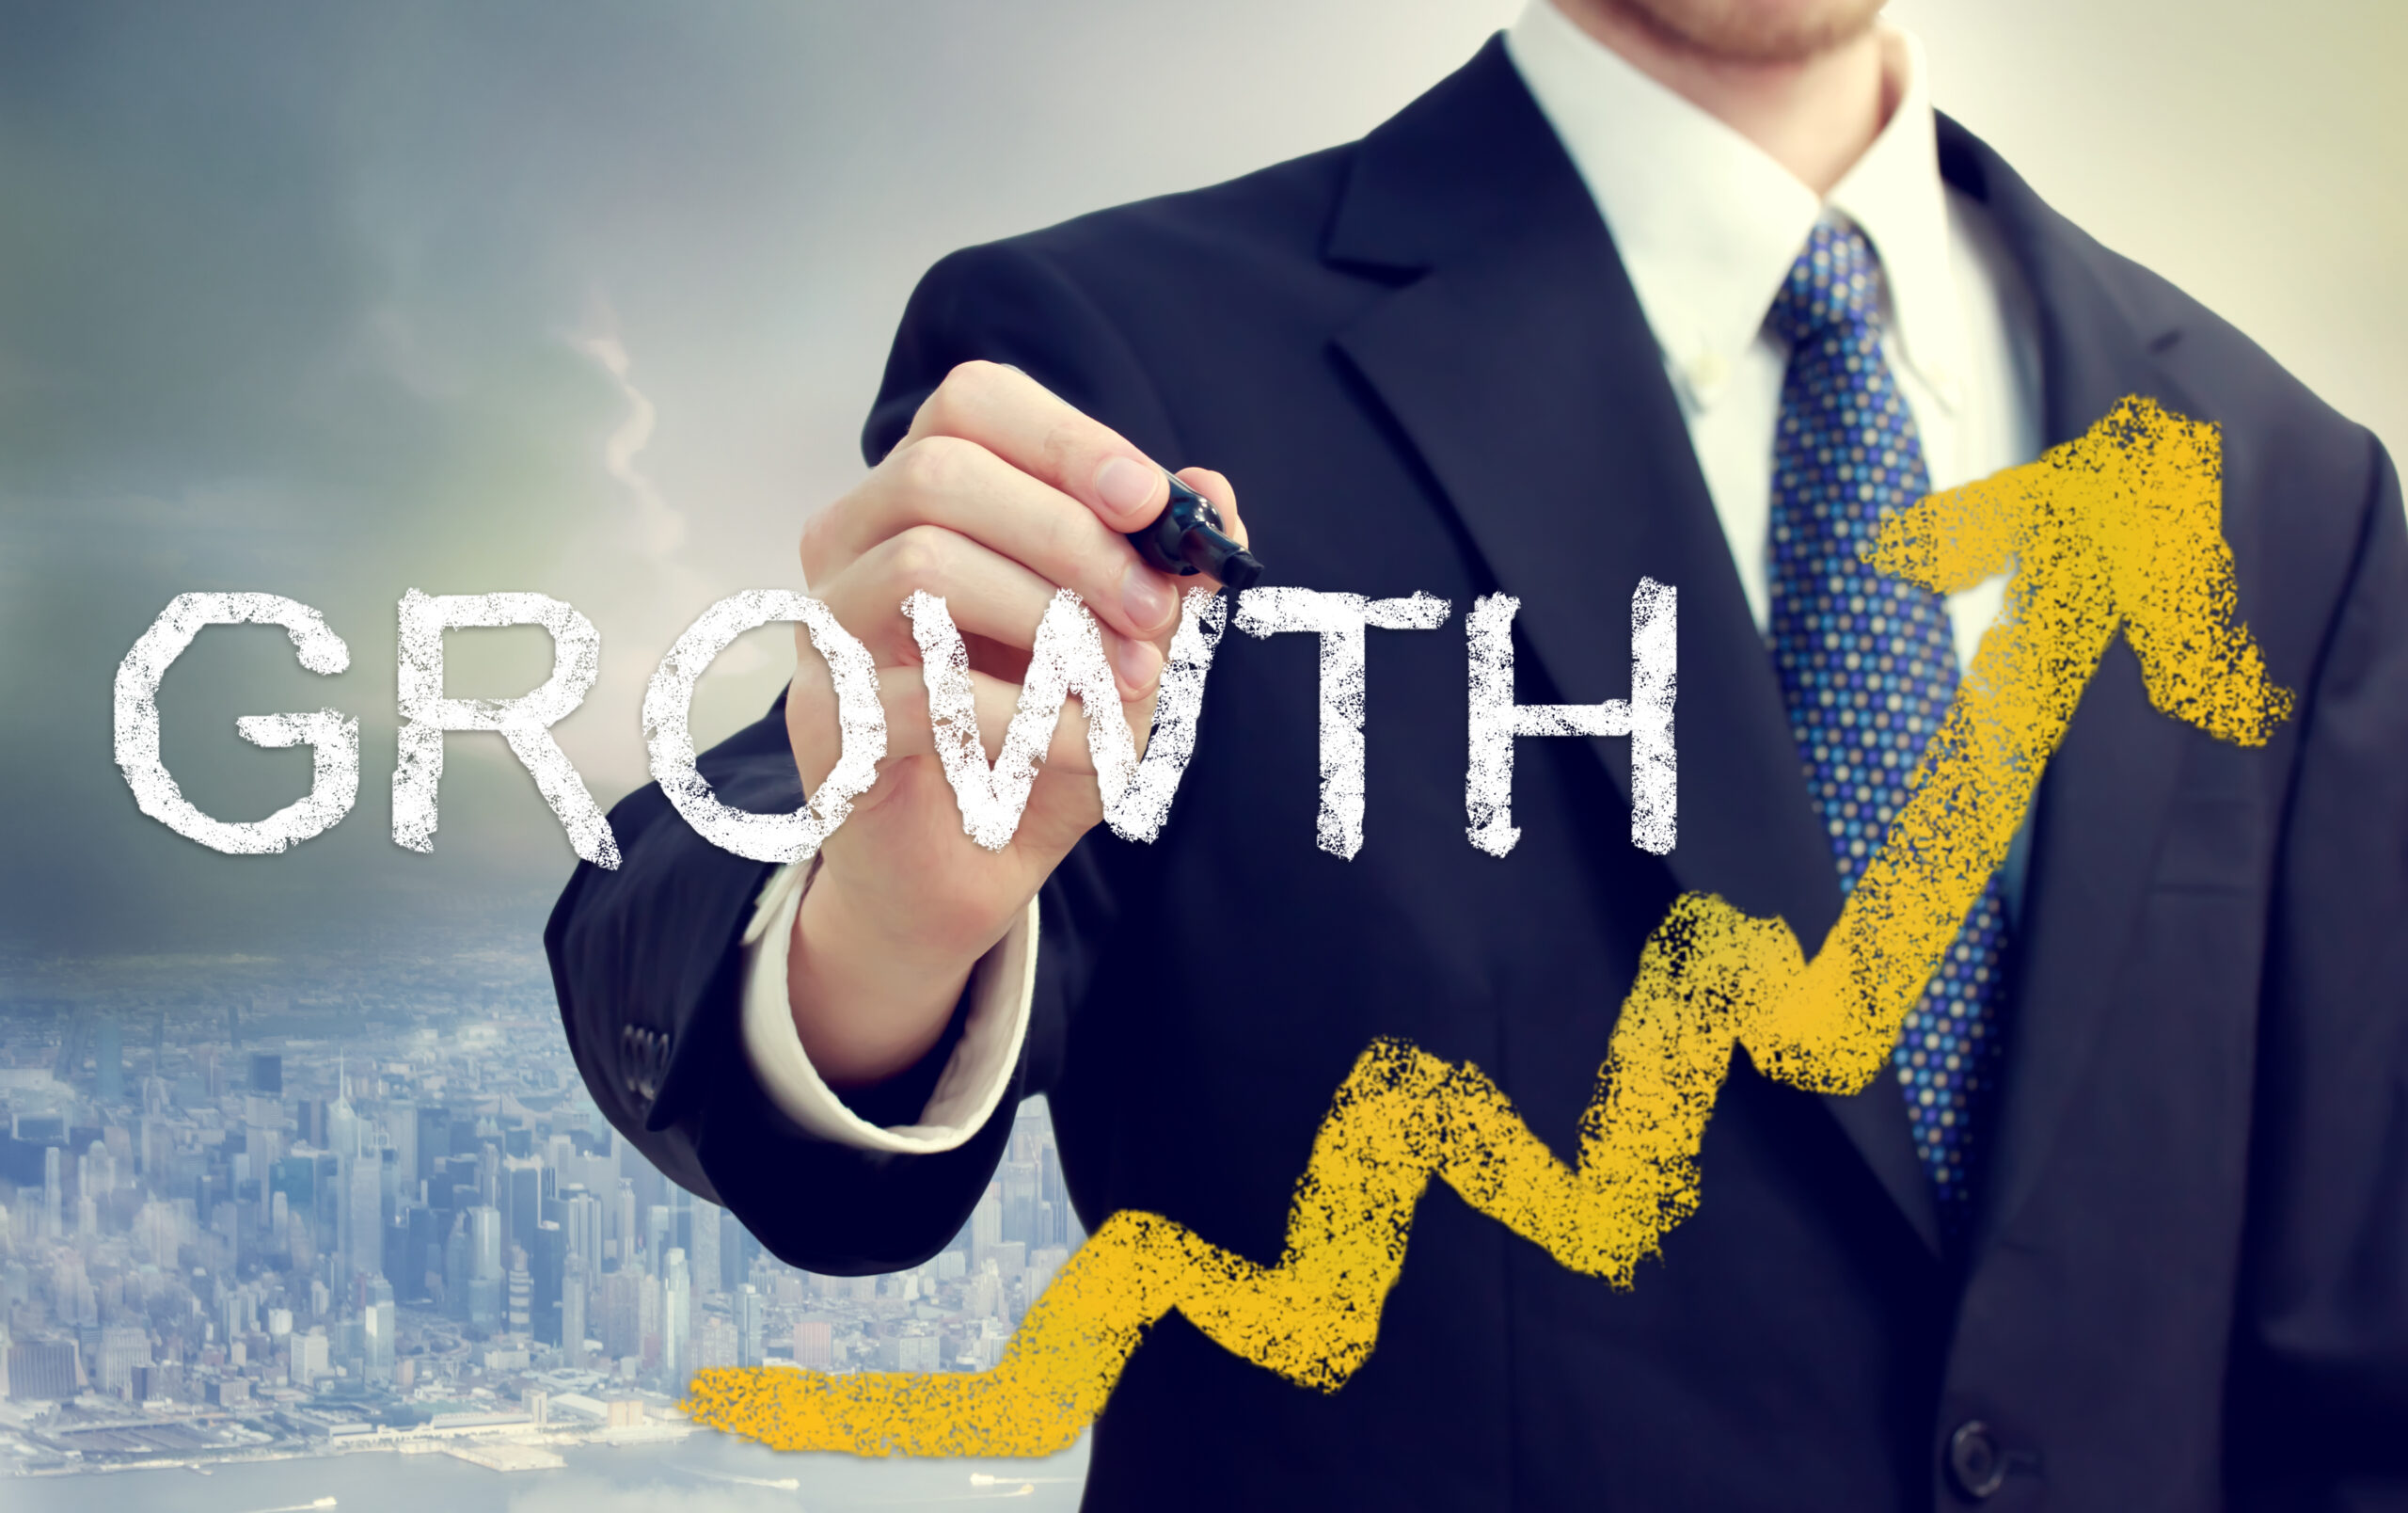 7 affordable ways to grow your business